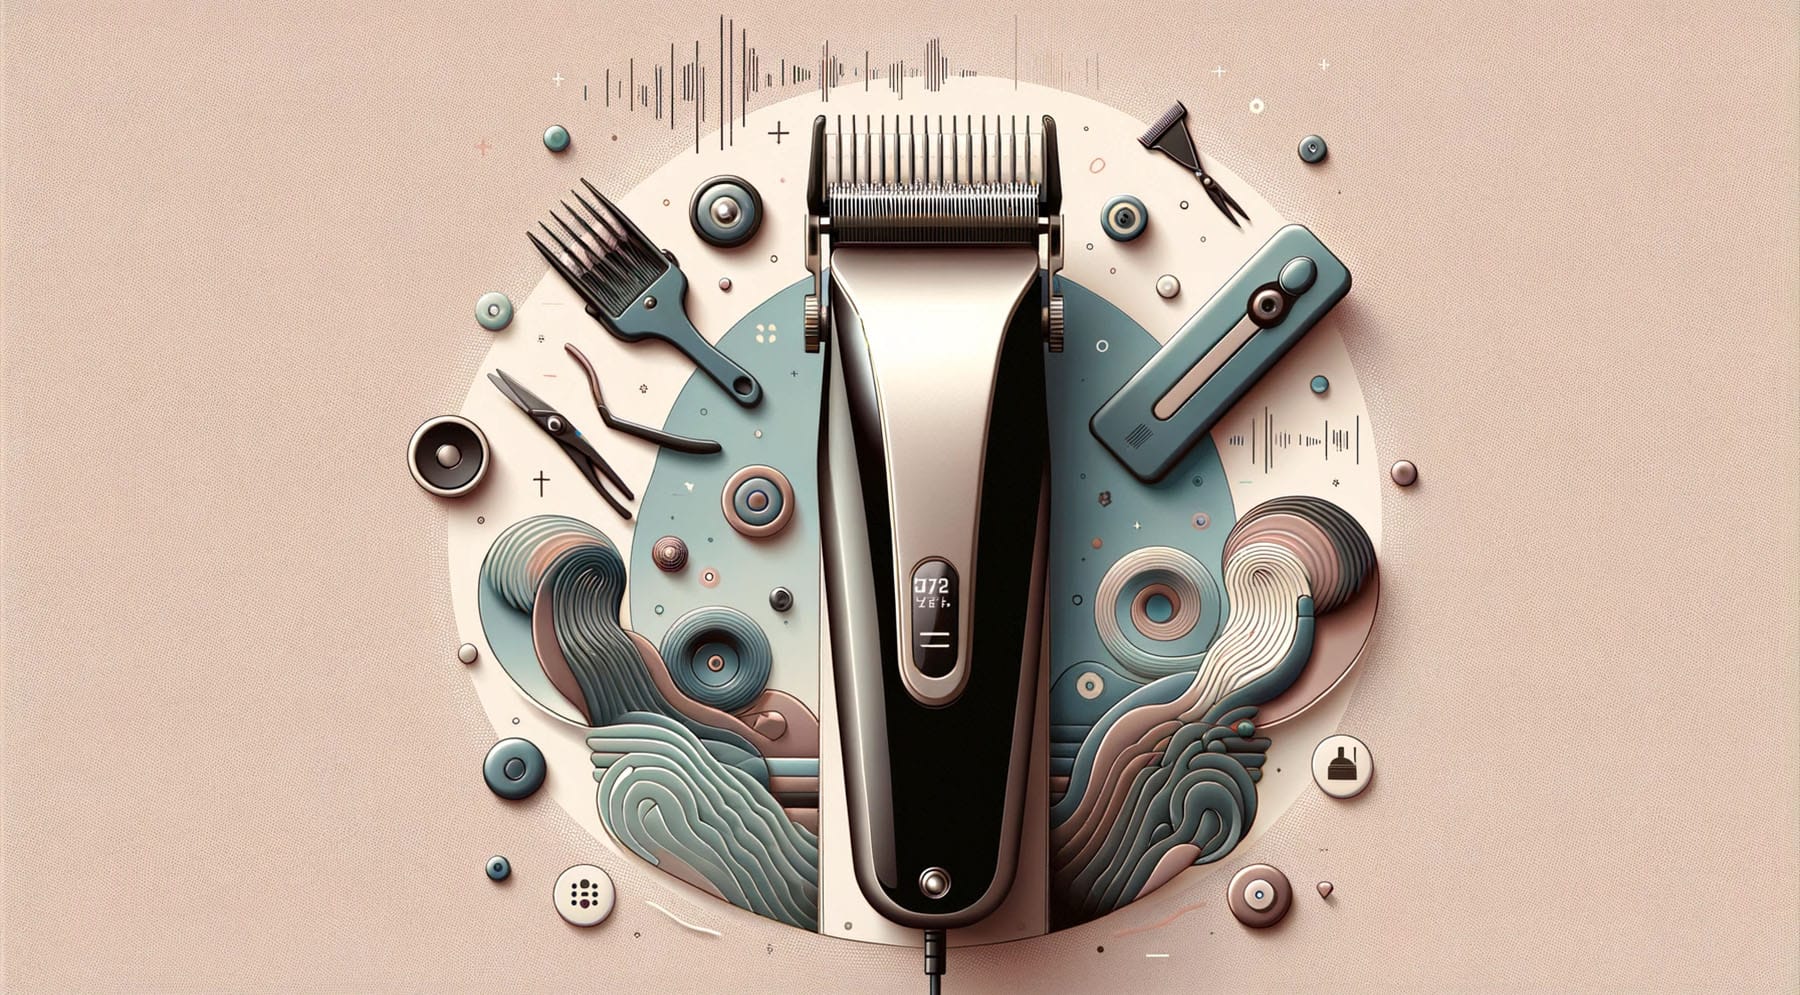 Buy quiet hair clippers - sleek, modern clippers in a tranquil setting